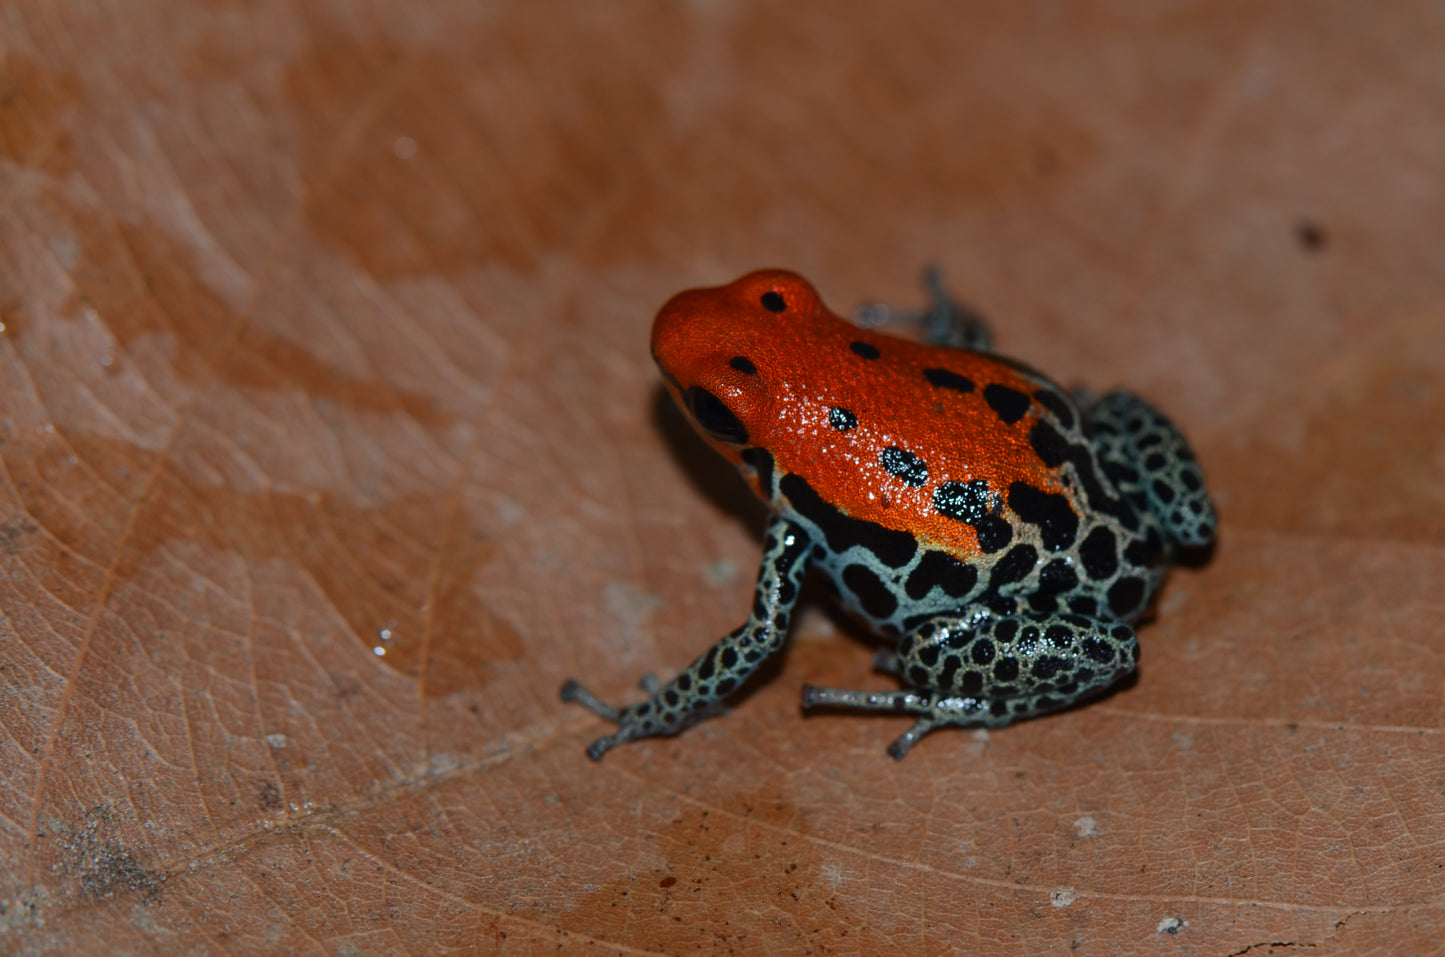 Ranitomeya reticulata "Red Faced"